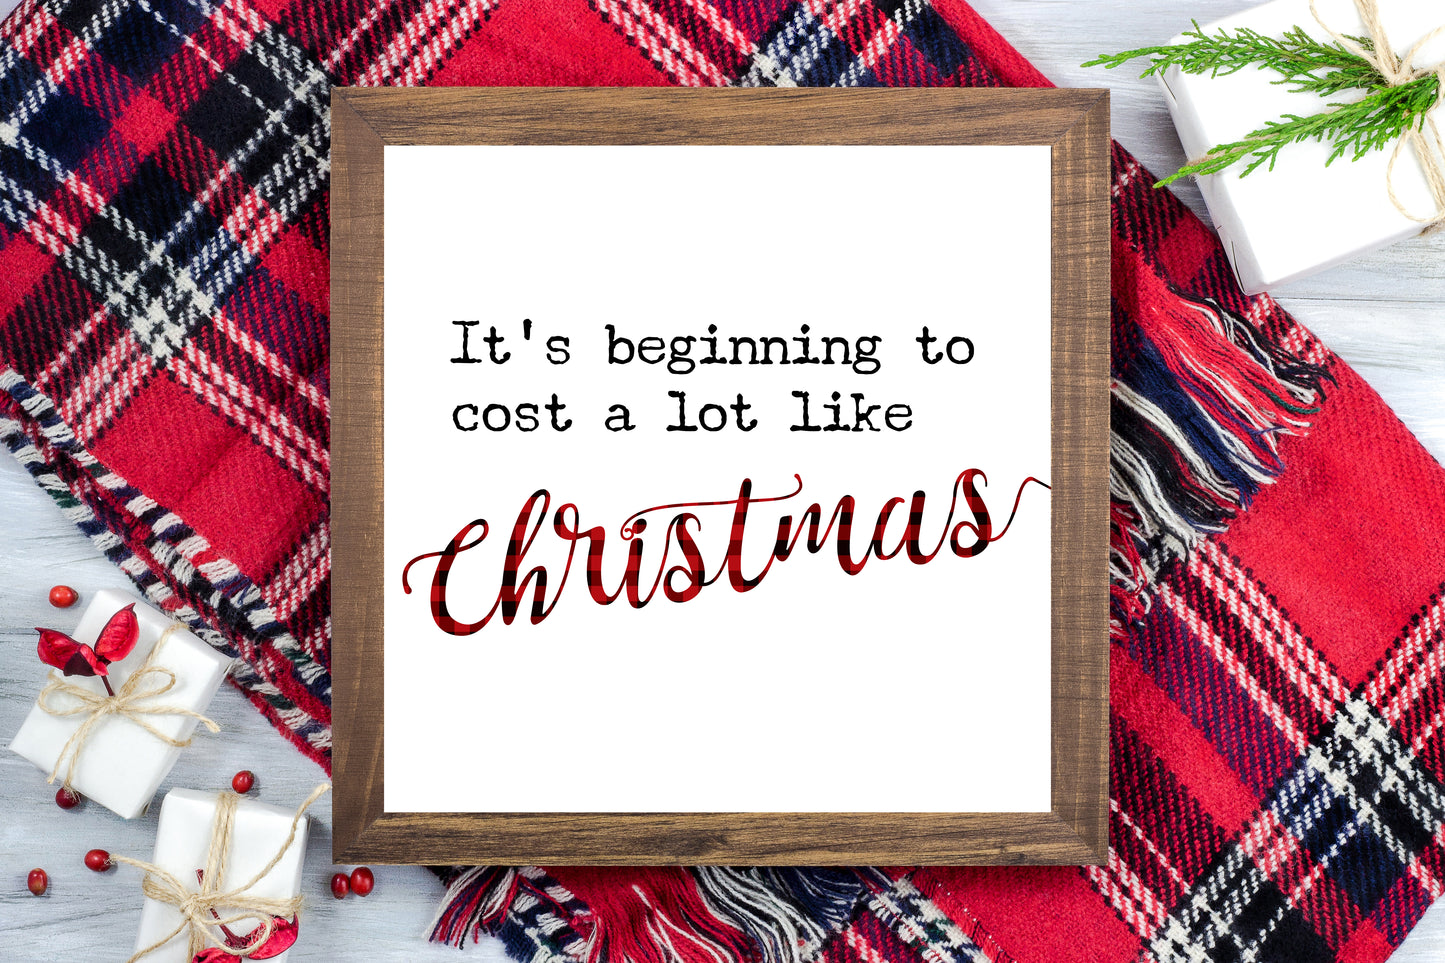 It's beginning to cost a lot like Christmas - Funny Christmas Printable Sign Farmhouse Style  - Digital File